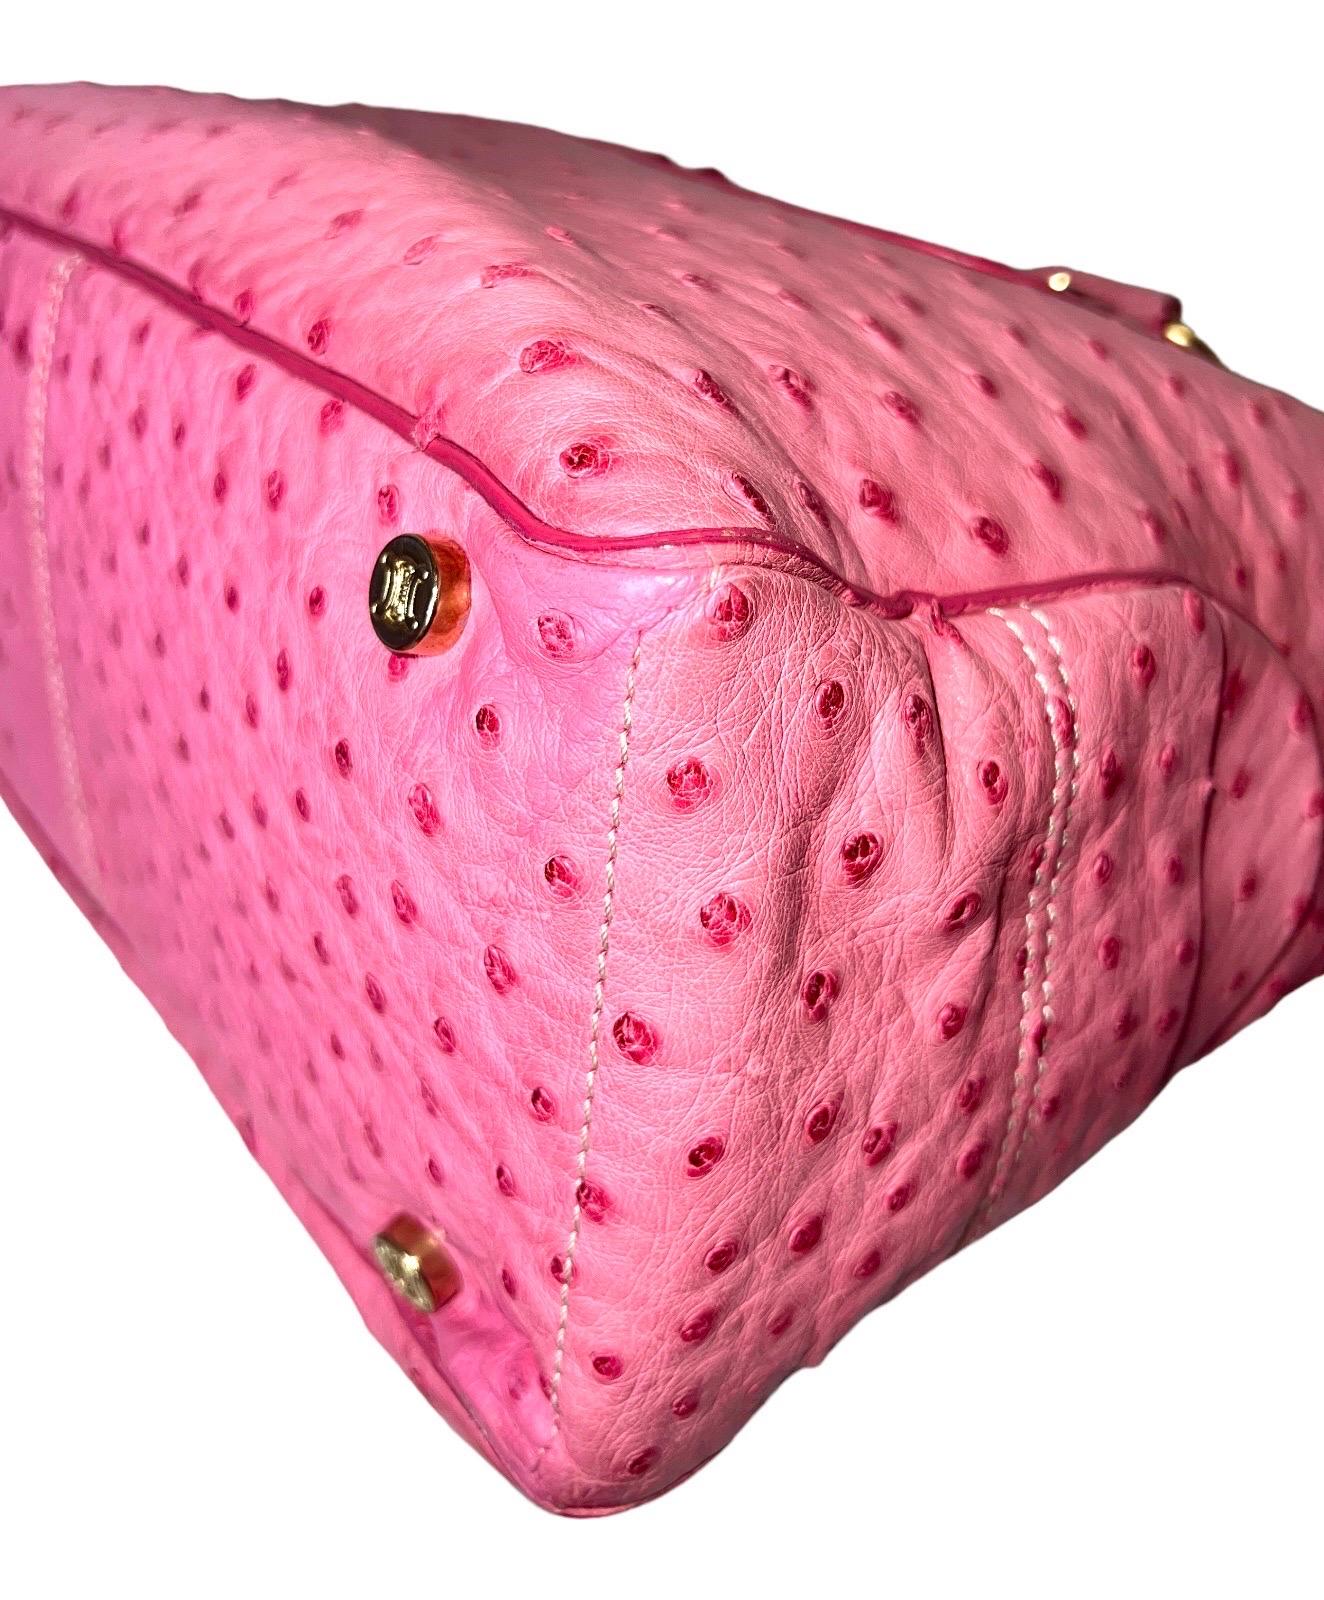 CELINE Rare Exotic Pink „Barbie“ Ostrich Skin Boogie Bag by Michael Kors 2000s For Sale 2